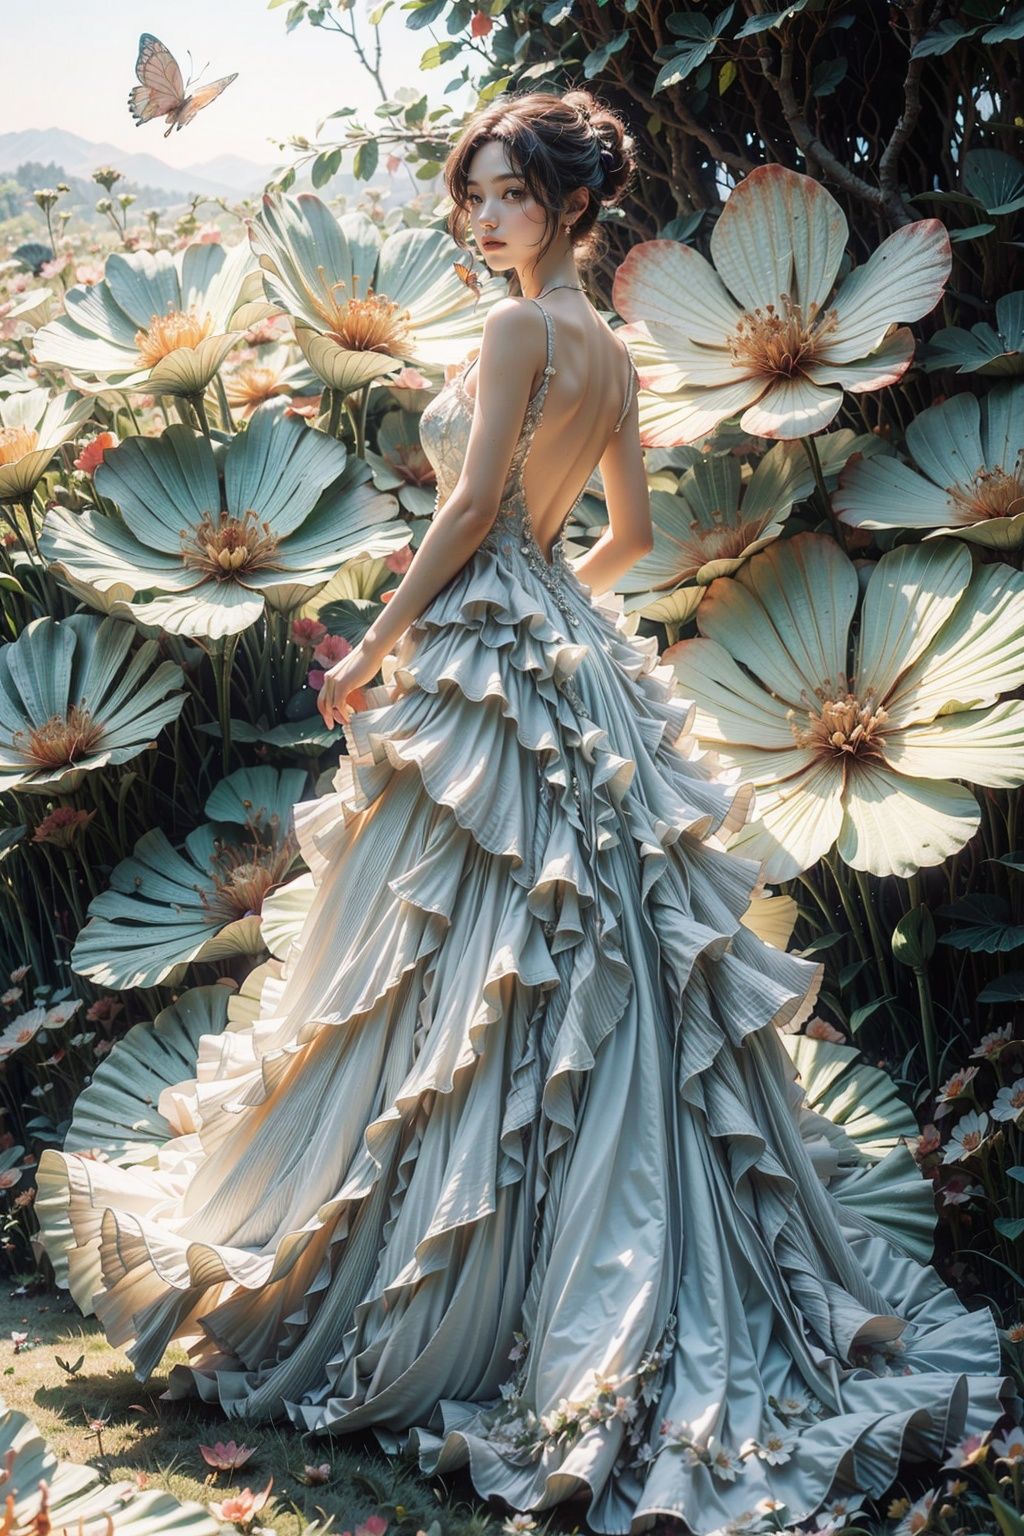 A short haired girl stands in front of the flowers, (in a shimmering backless dress, catching butterflies on the grass). The blue sky, Fuji film style C200, depth of field, photography style of Hideyoshi Hamada, light blue and light white, contemplative portrait painting, Osague. I can't believe what a beautiful island and dreamlike scene it is. What happened